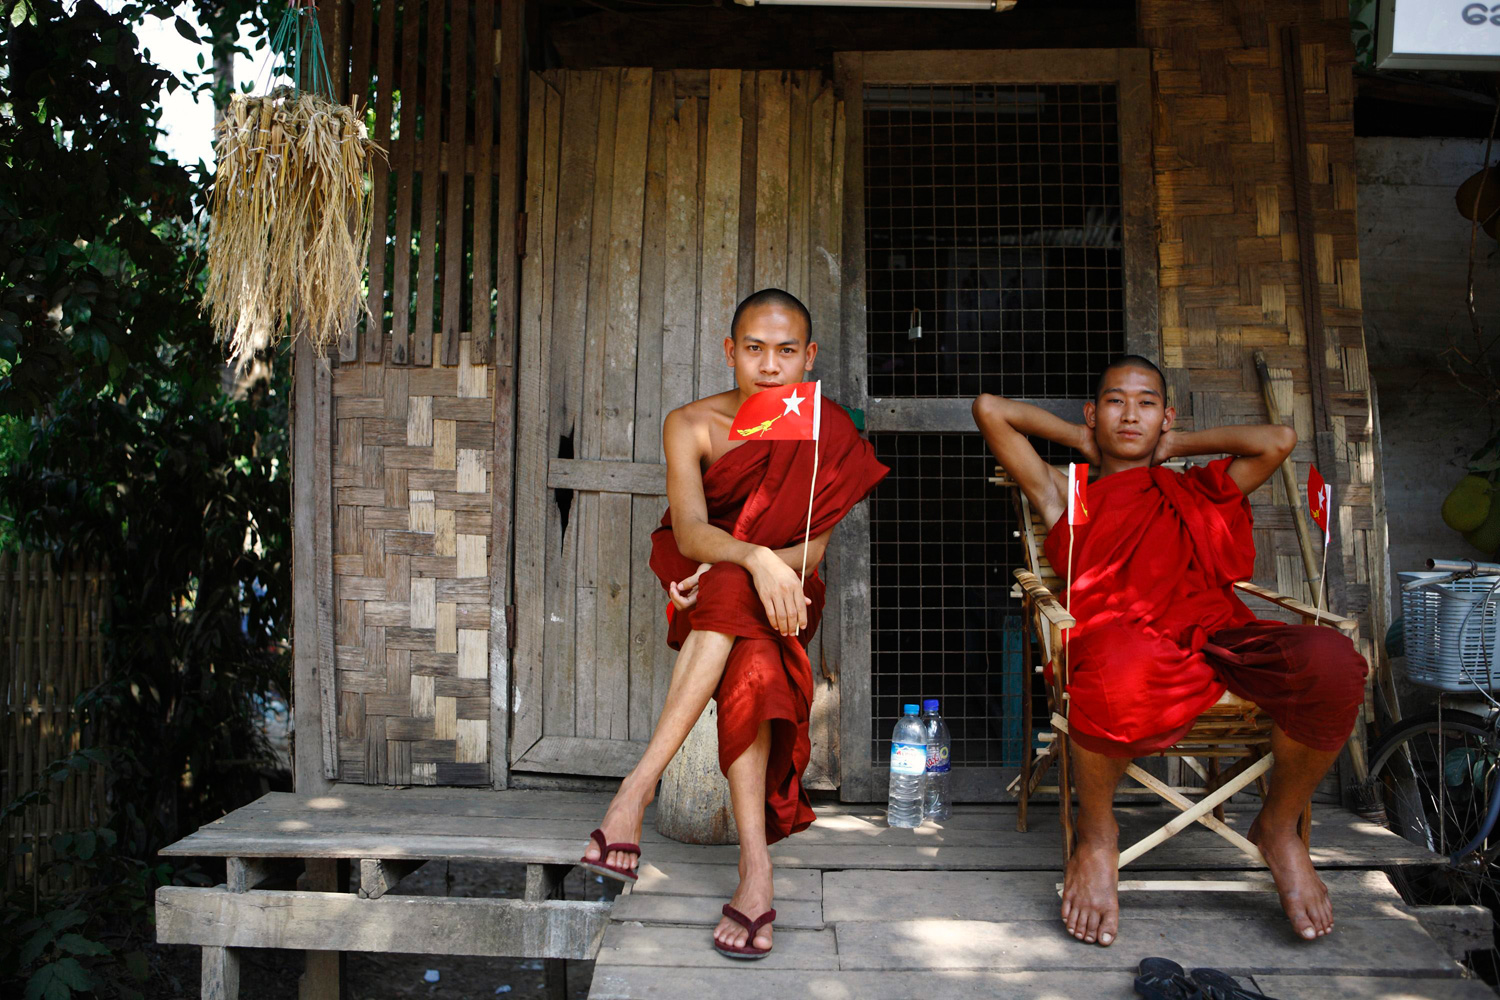 March 28, 2012. Buddhist monks hold the party flag as they rest outside a house during the election campaign for the NLD party in Yangon, Myanmar.